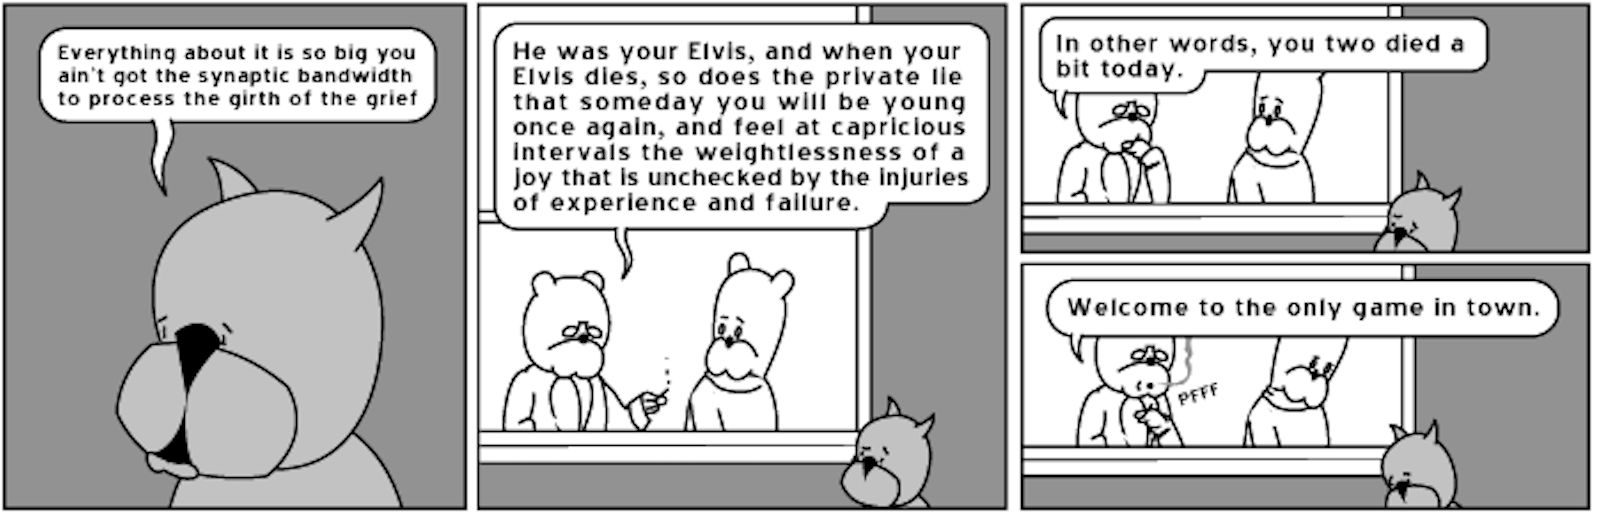 achewood - only game in town.png